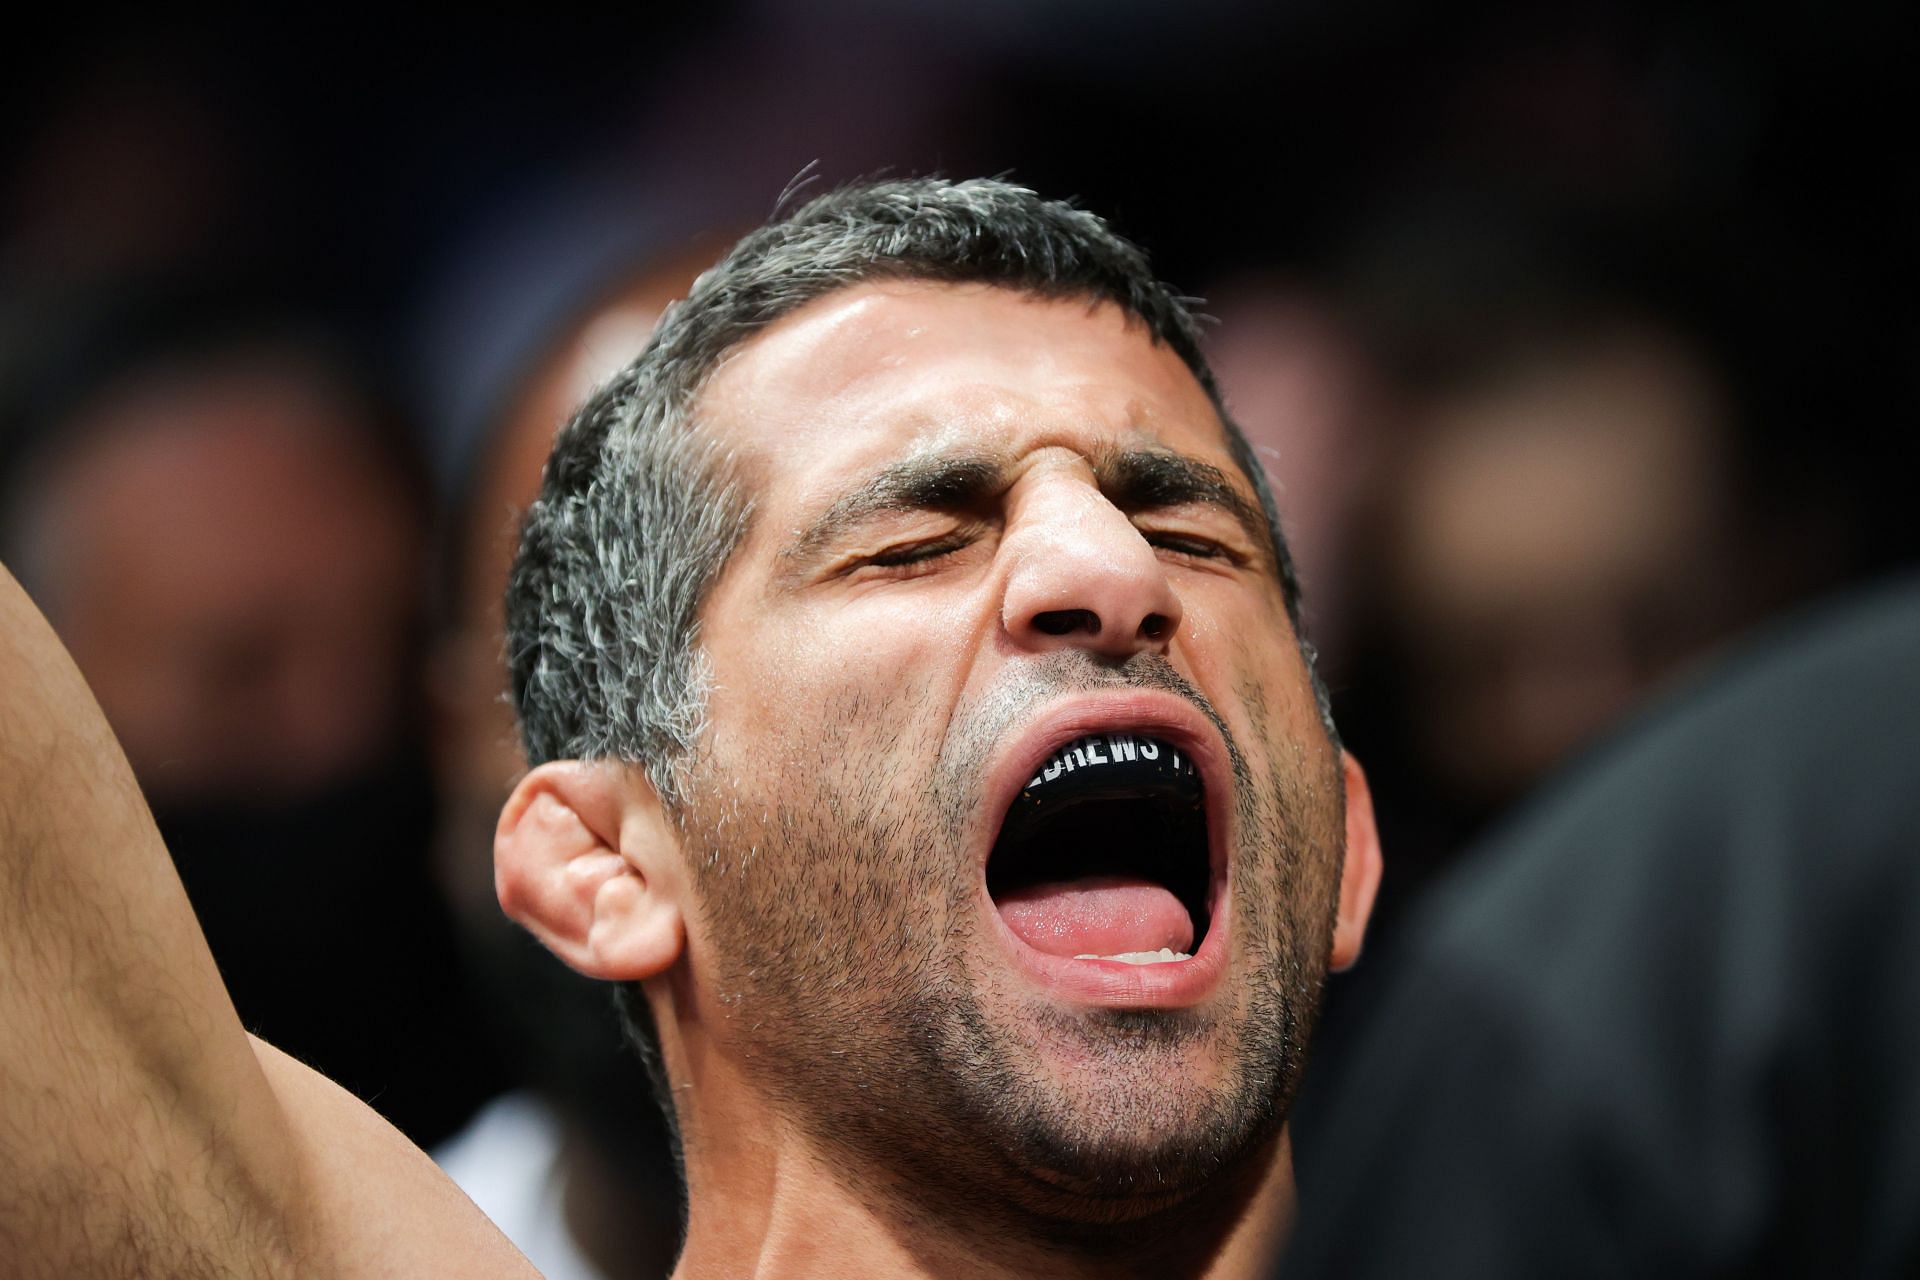 Beneil Dariush has 0 wins over fighters currently ranked in the top 10